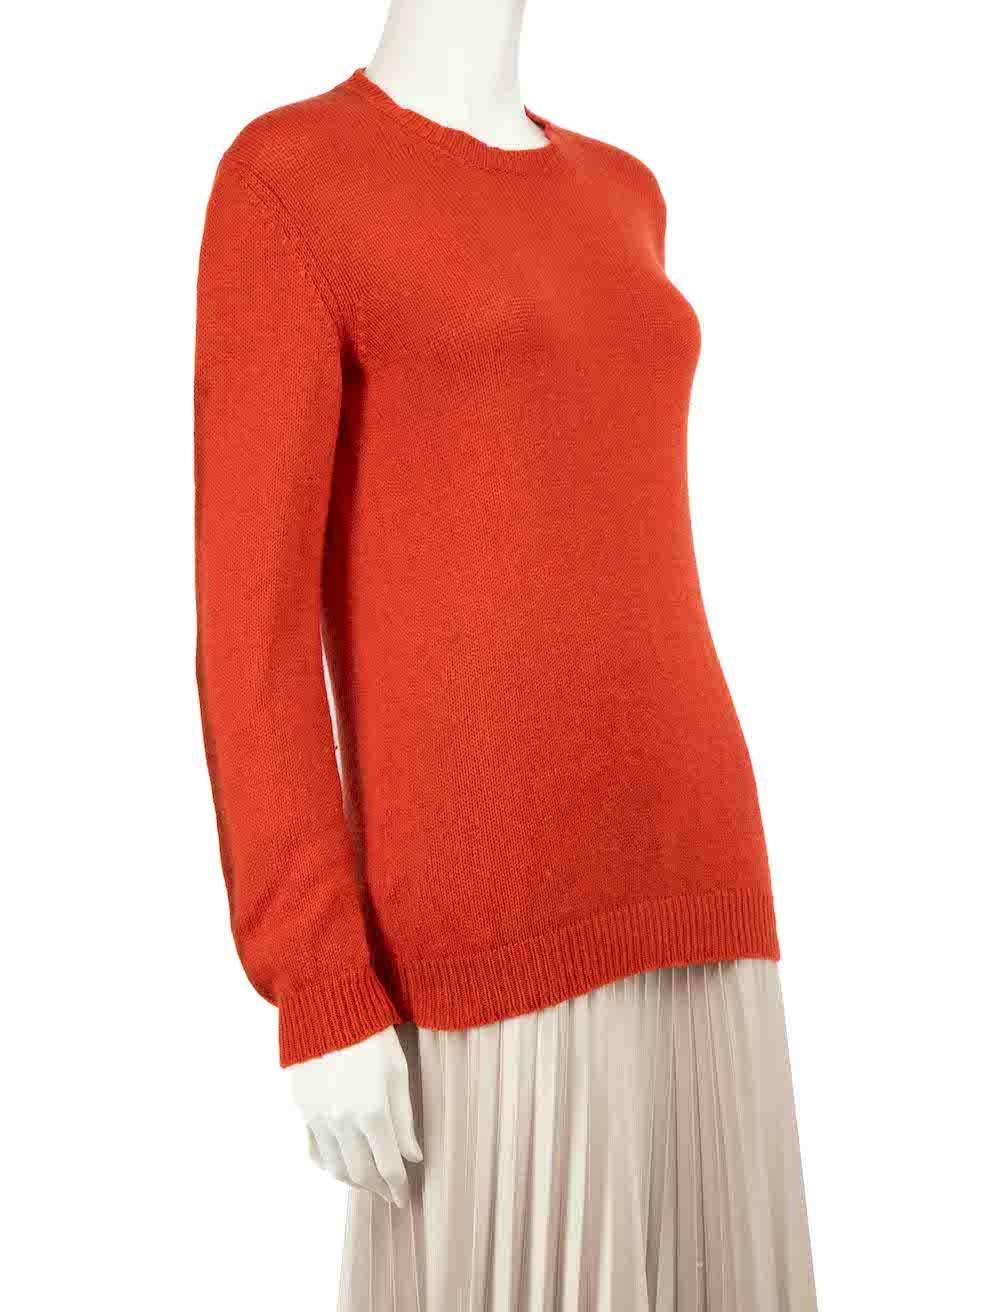 CONDITION is Very good. Minimal wear to jumper is evident. Minimal wear to the knit with pilling to the texture - particularly at the sleeves on this used Marni designer resale item.
 
 
 
 Details
 
 
 Orange
 
 Cashmere
 
 Knit jumper
 
 Ombré